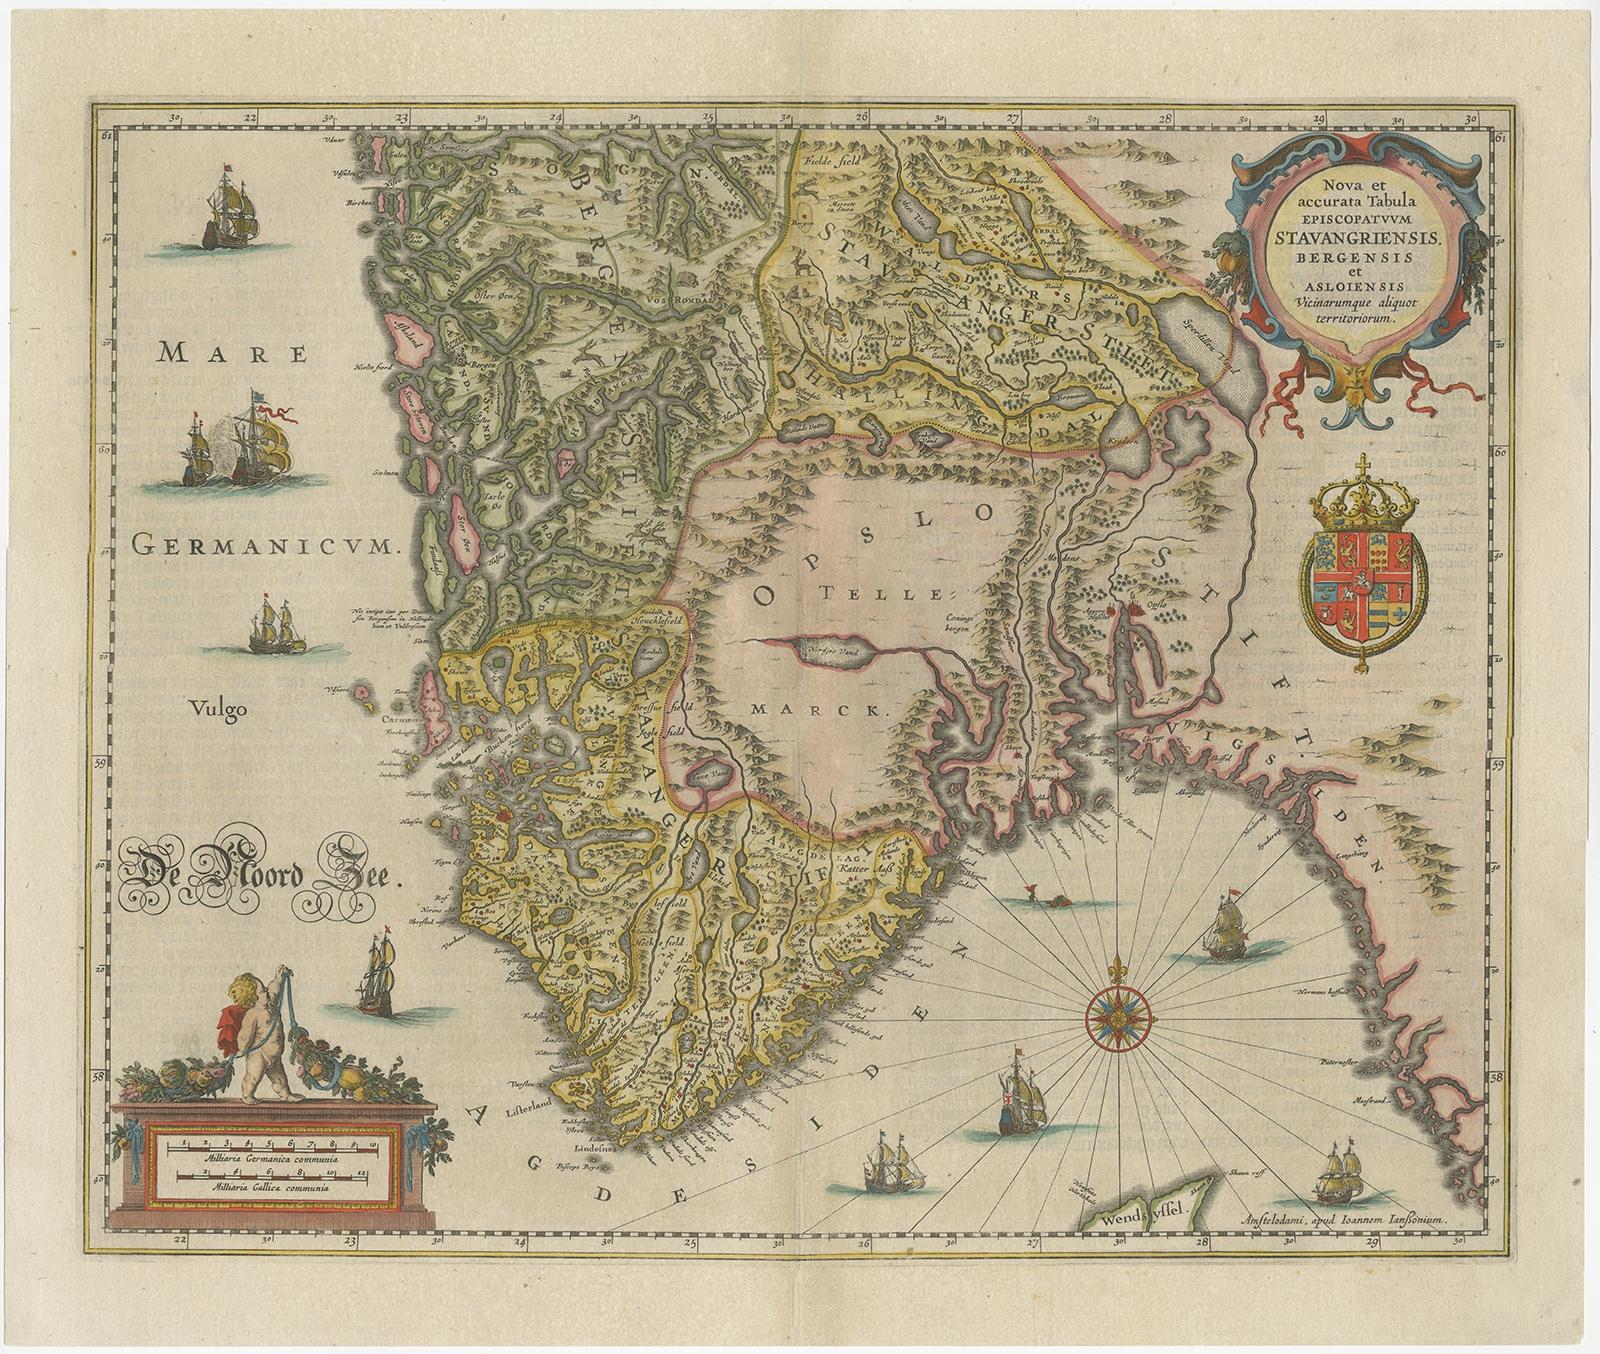 Antique map titled 'Nova et Accurata Tabula Episcopatuum Stavangriensis et Asloiensis'. 

Old map of the southern part of Norway, it covers the region around Bergen. Decorated with many ships and a compass rose. Source unknown, to be